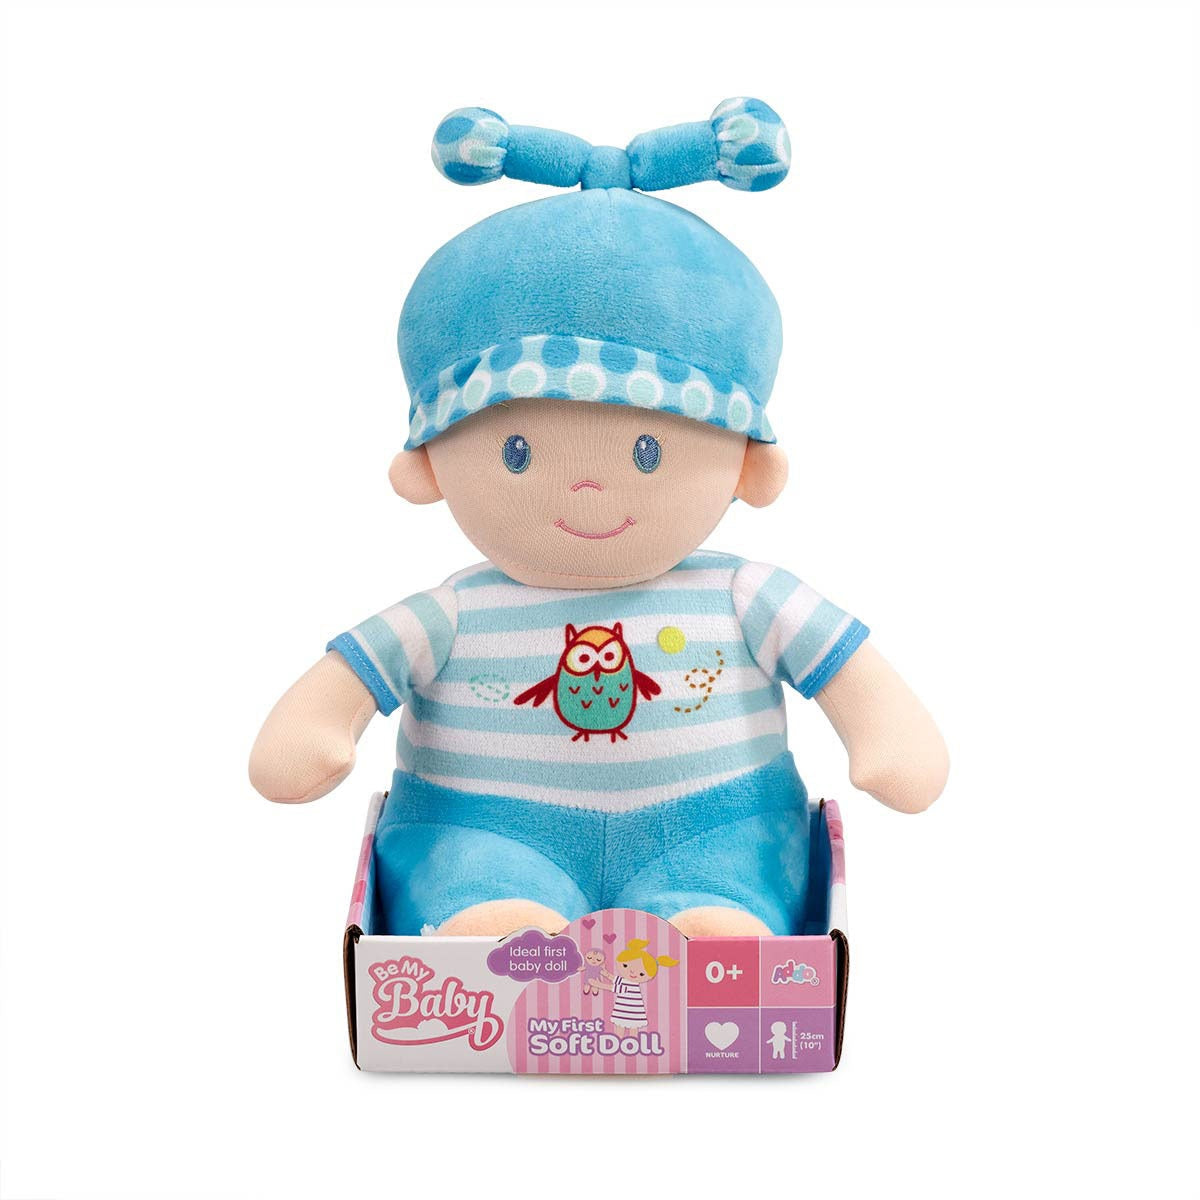 Be My Baby My First 25cm Soft Doll - Styles Vary